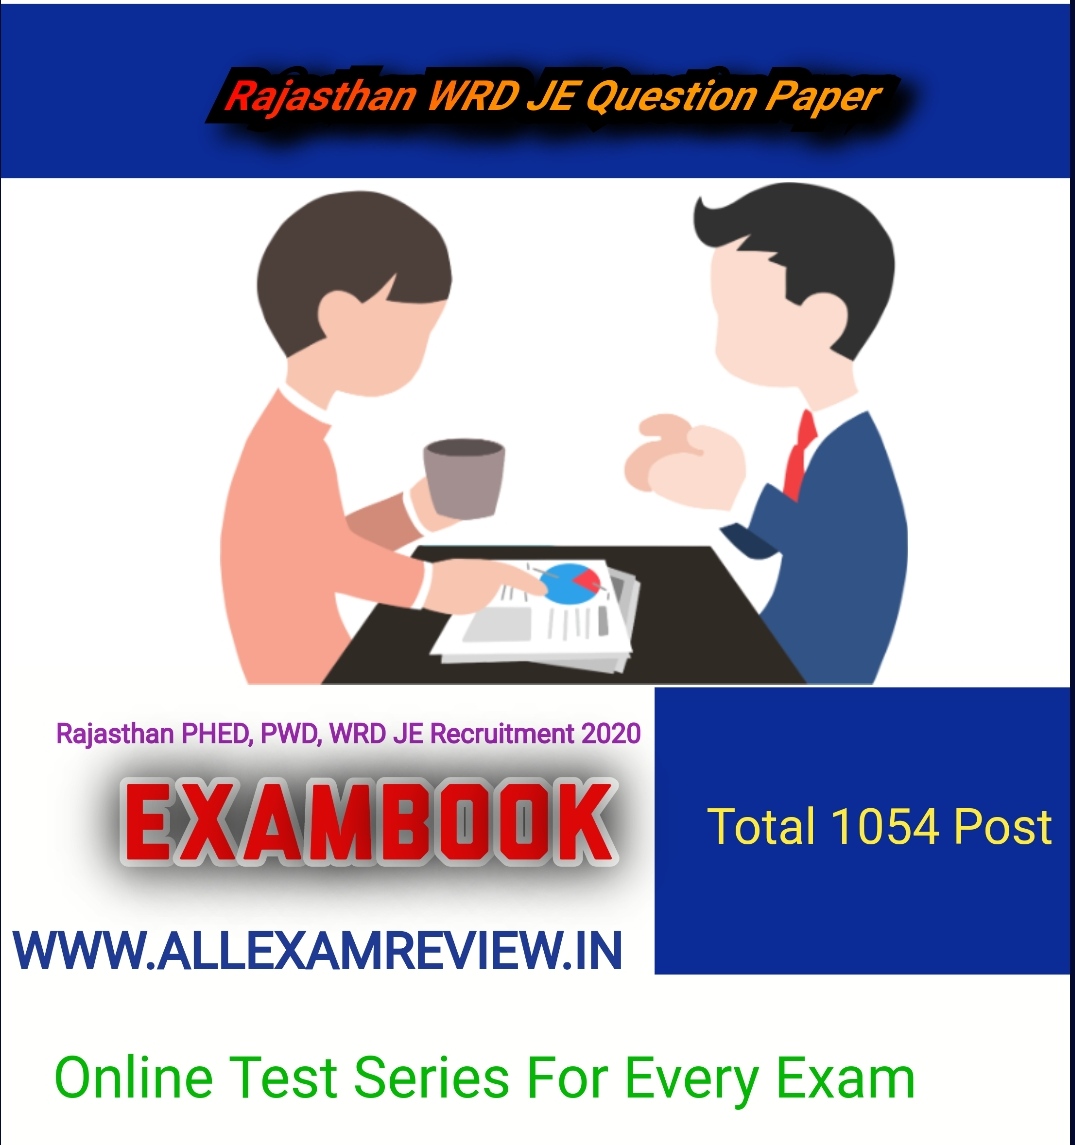 Rajasthan WRD JE Question Paper Previous Year